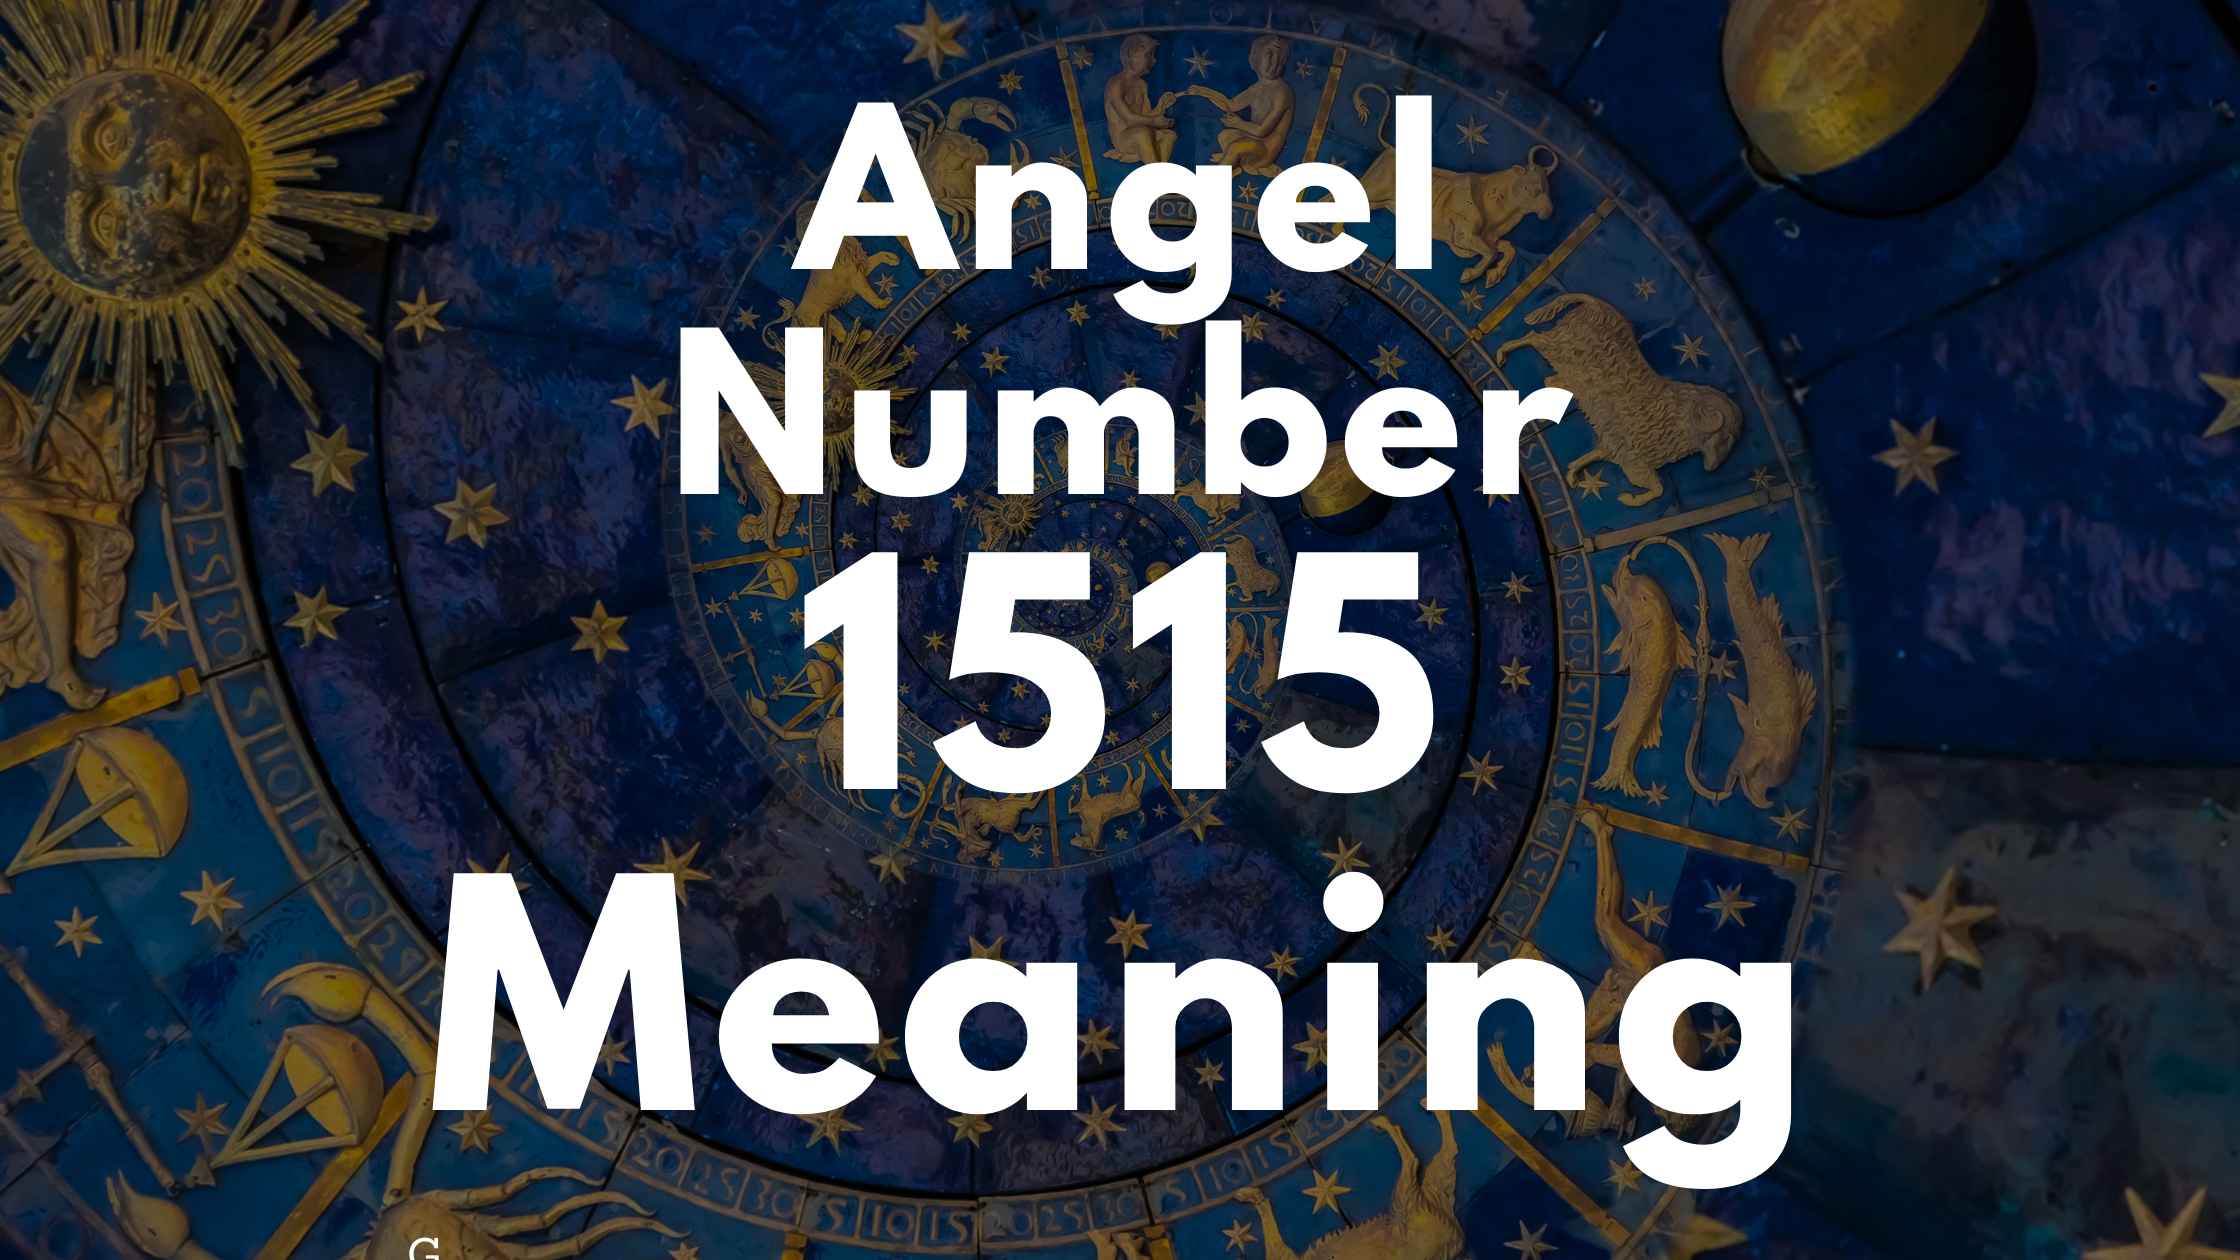 Angel Number 1515 Spiritual Meaning, Symbolism, and Significance